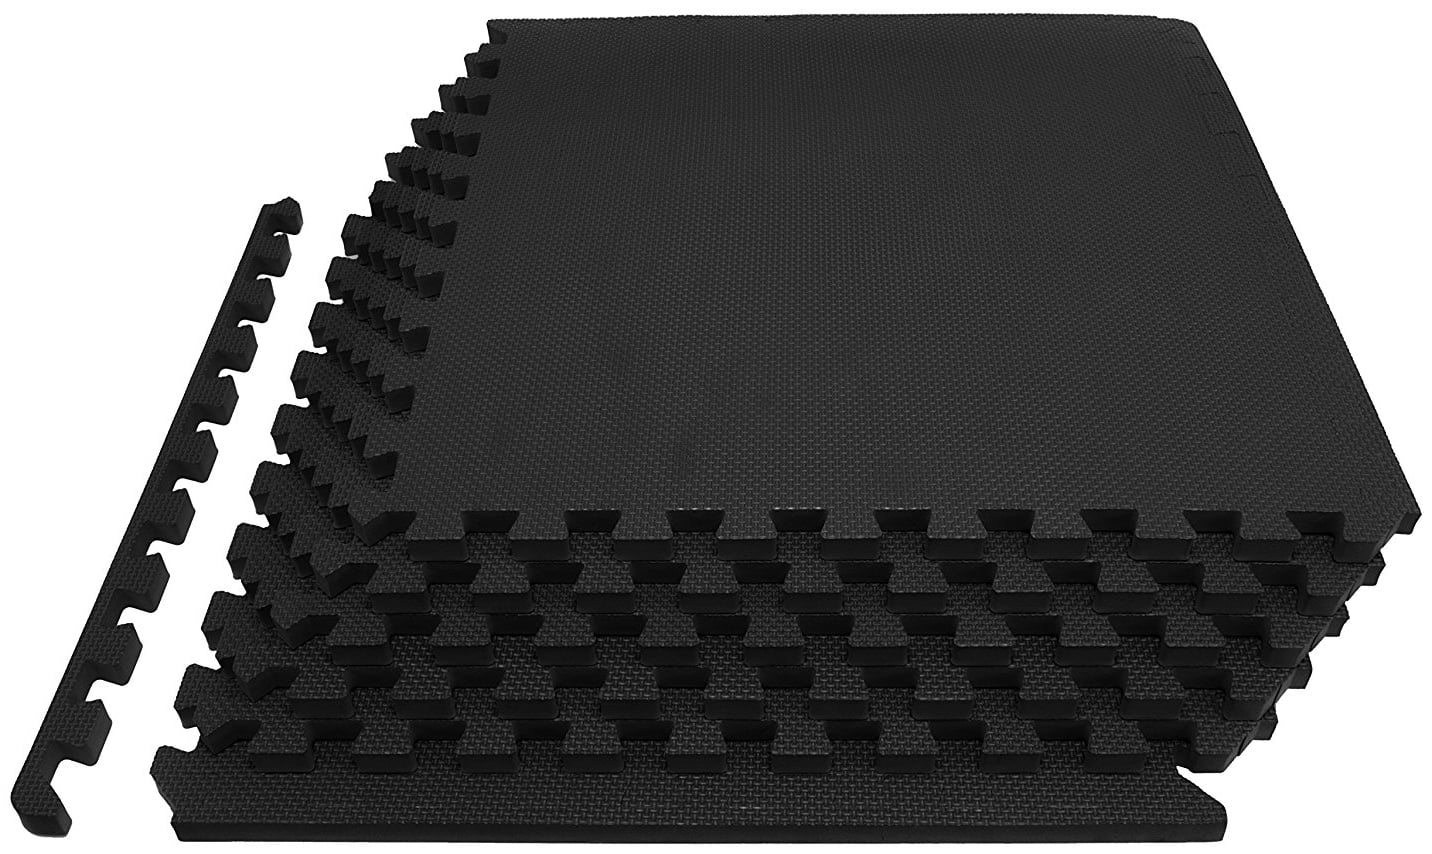 Charcoal Grey Clevr 1/2" Thick 144 Sq Ft EVA Foam Floor Exercise Gym Mats 